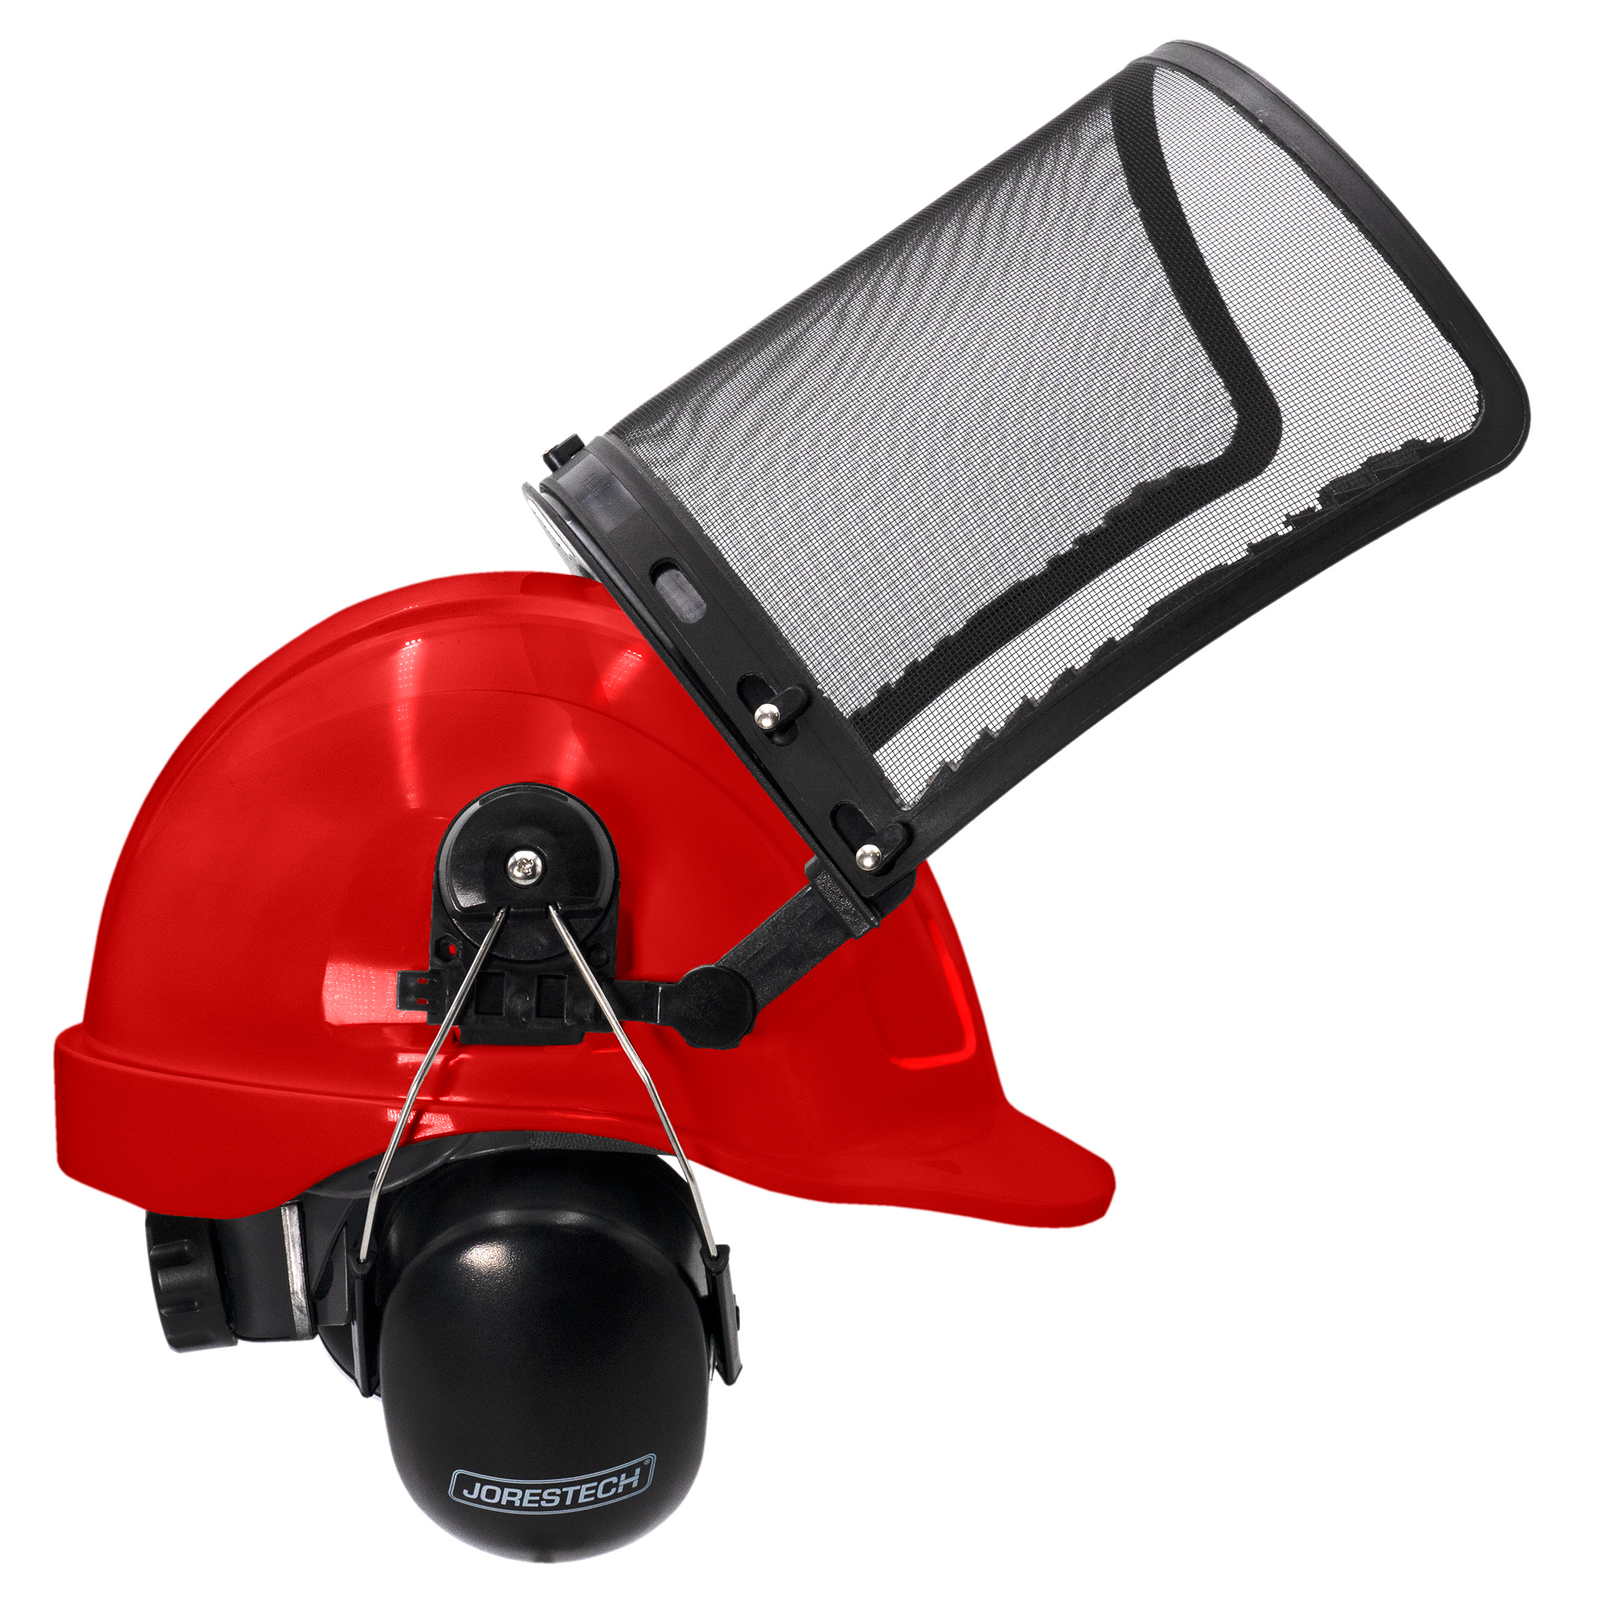 Red safety cap style hard hat kit with iron mesh face shield and earmuffs for hearing protection